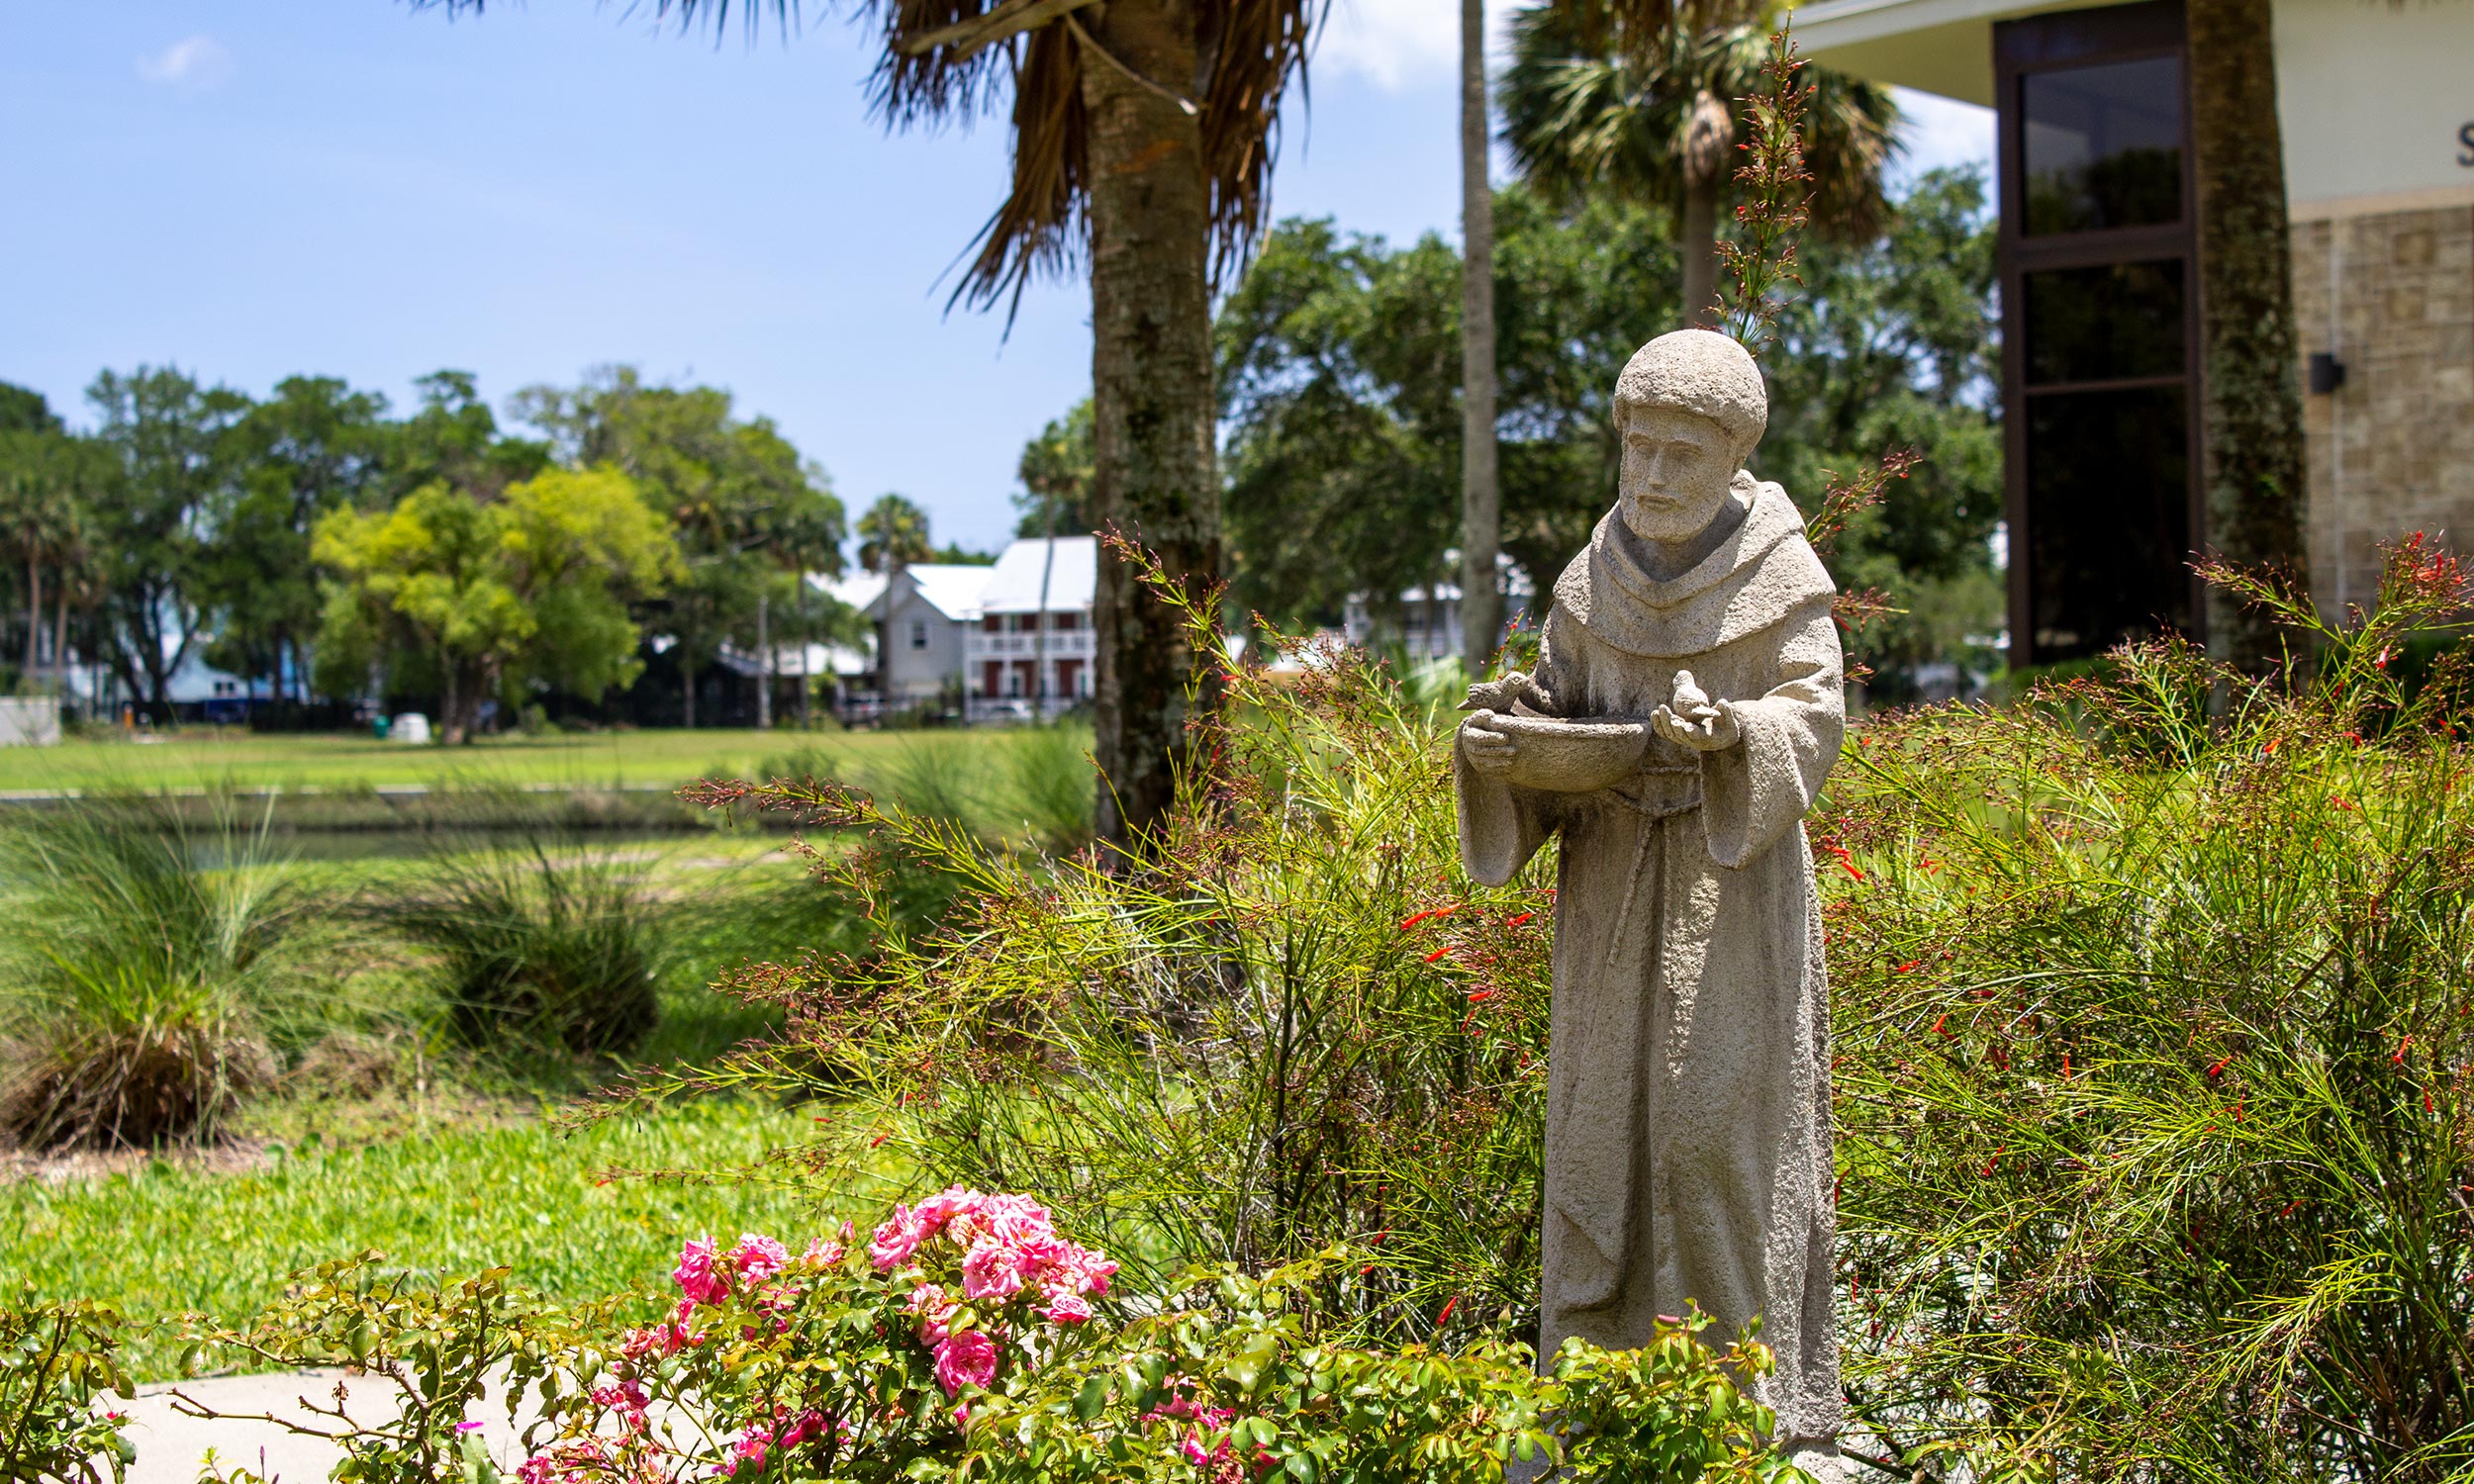 A statue of St. Francis on the grounds of the Nombre de Dios in St. Augustine.